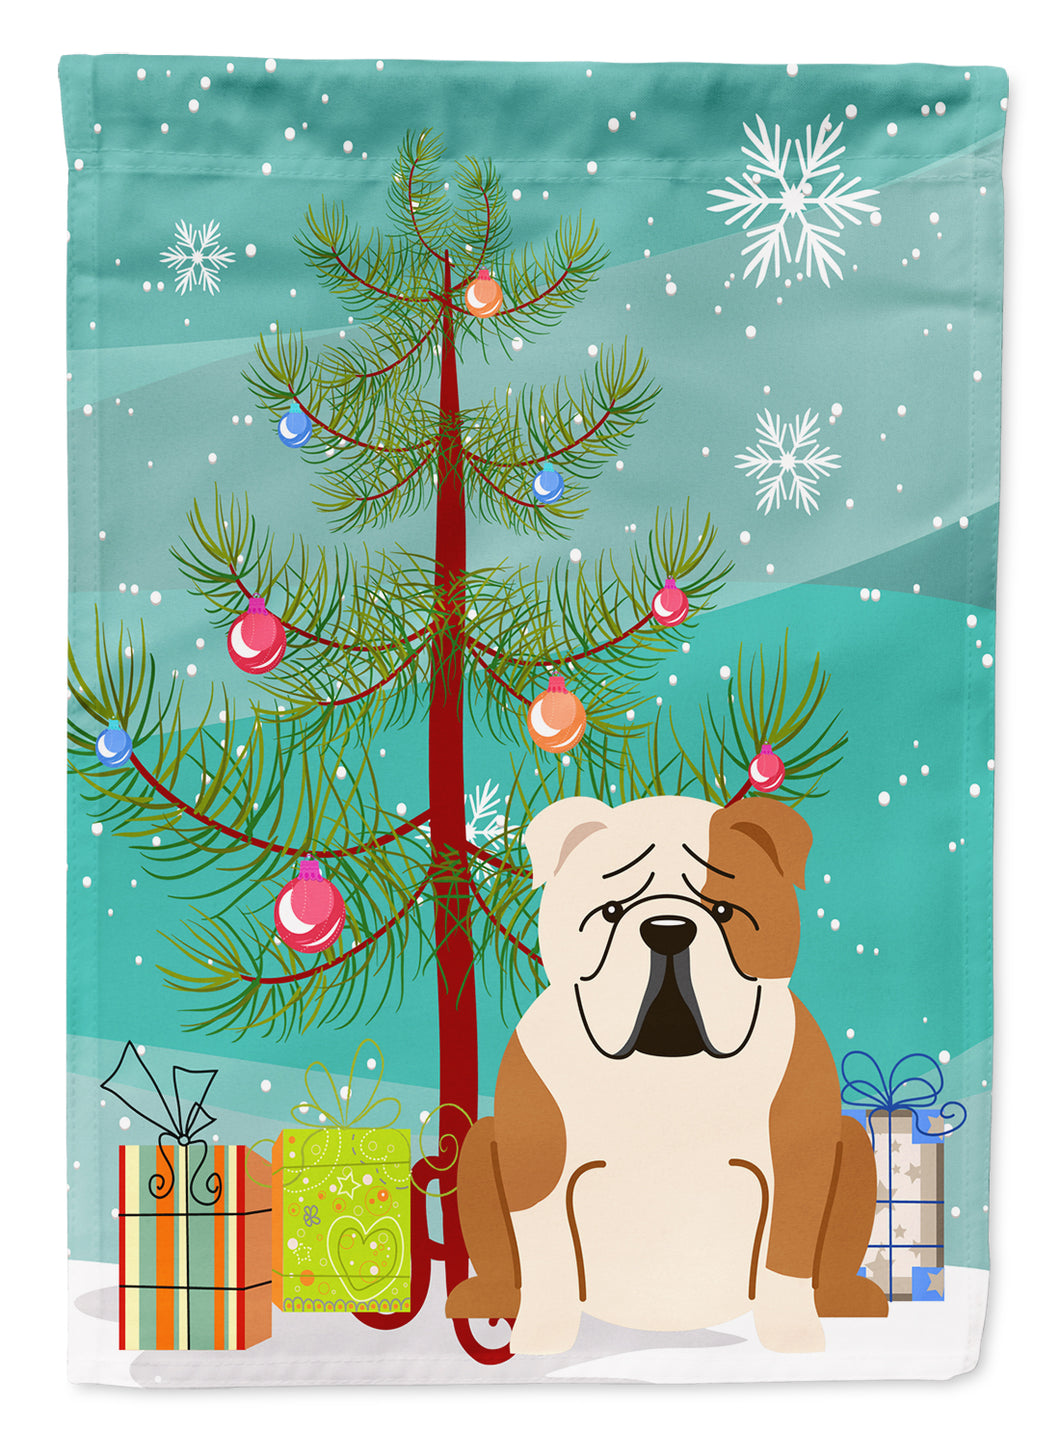 11 x 15 1/2 in. Polyester Merry Christmas Tree English Bulldog Fawn White Garden Flag 2-Sided 2-Ply